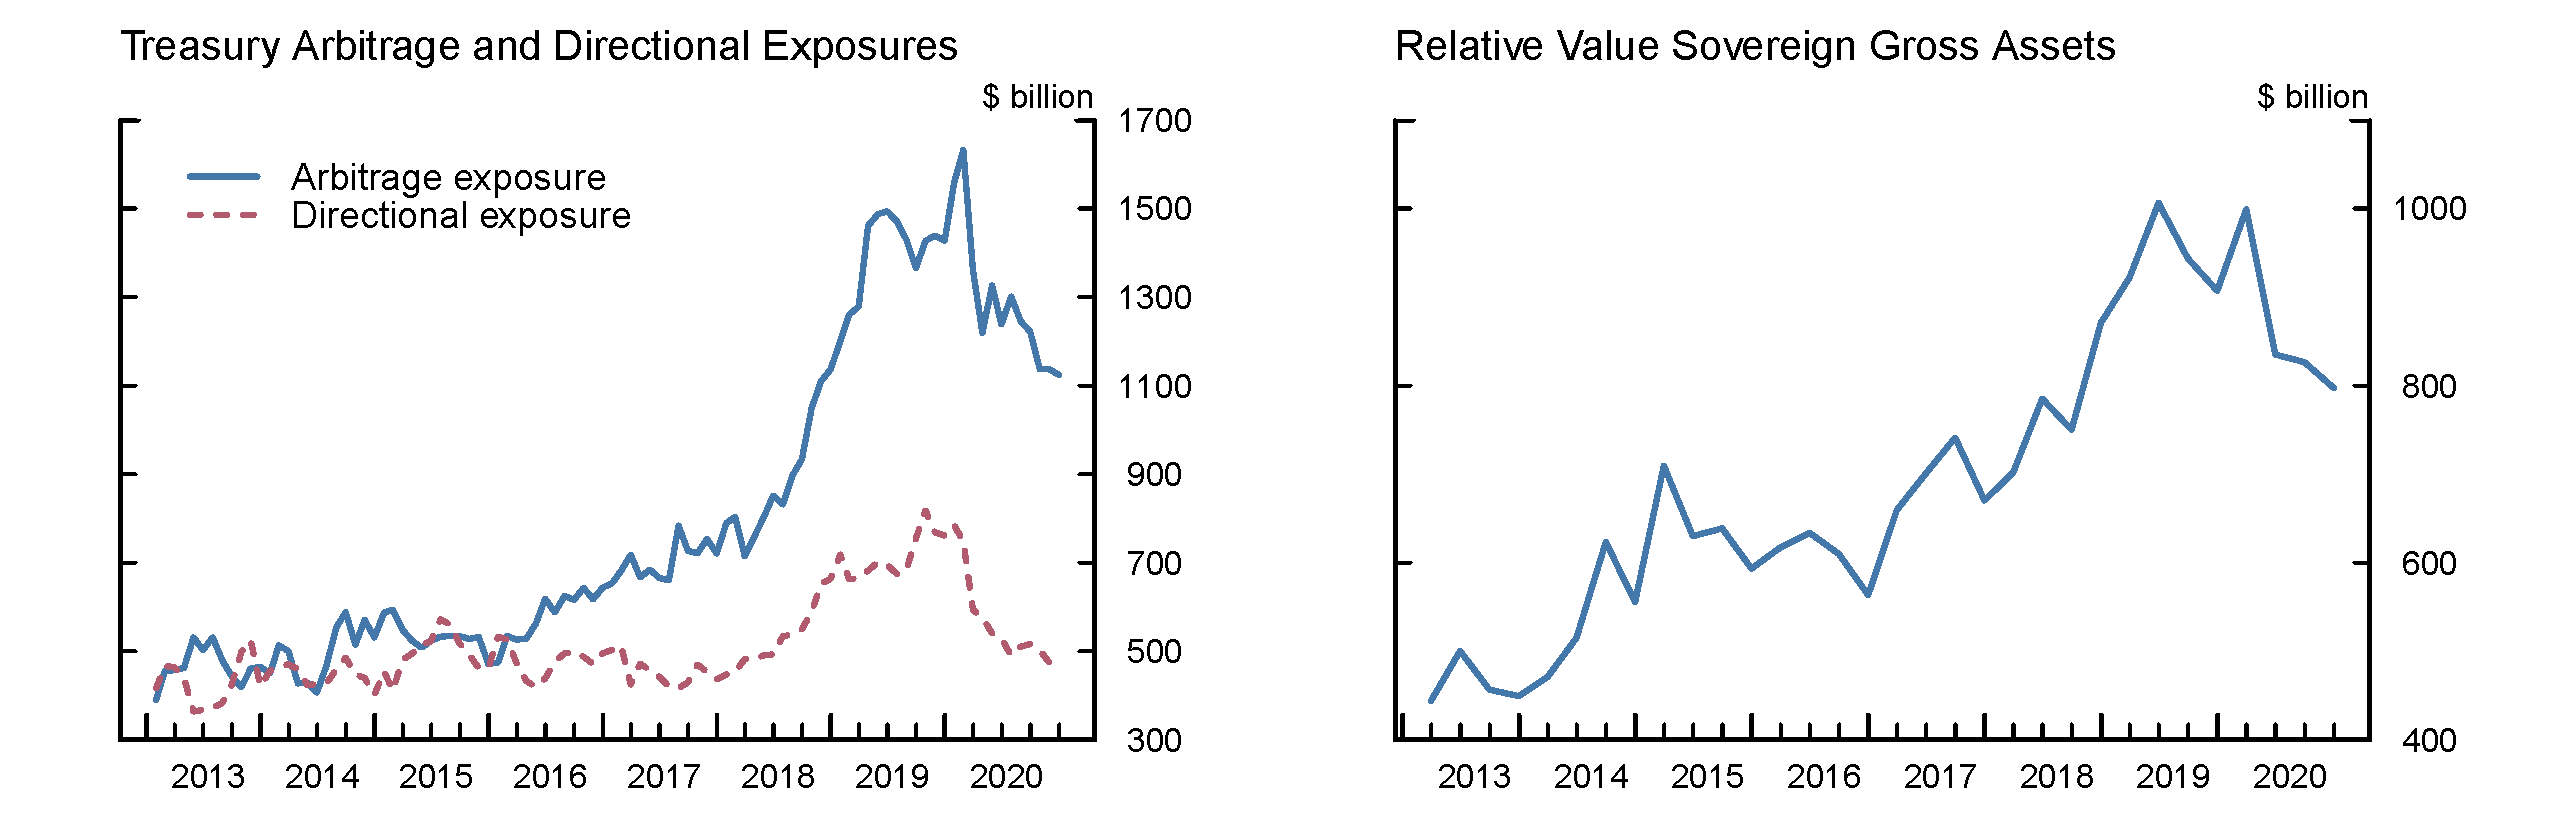 Figure 3. Treasury arbitrage activity and gross assets allocated to relative value sovereign strategies. See accessible link for data.